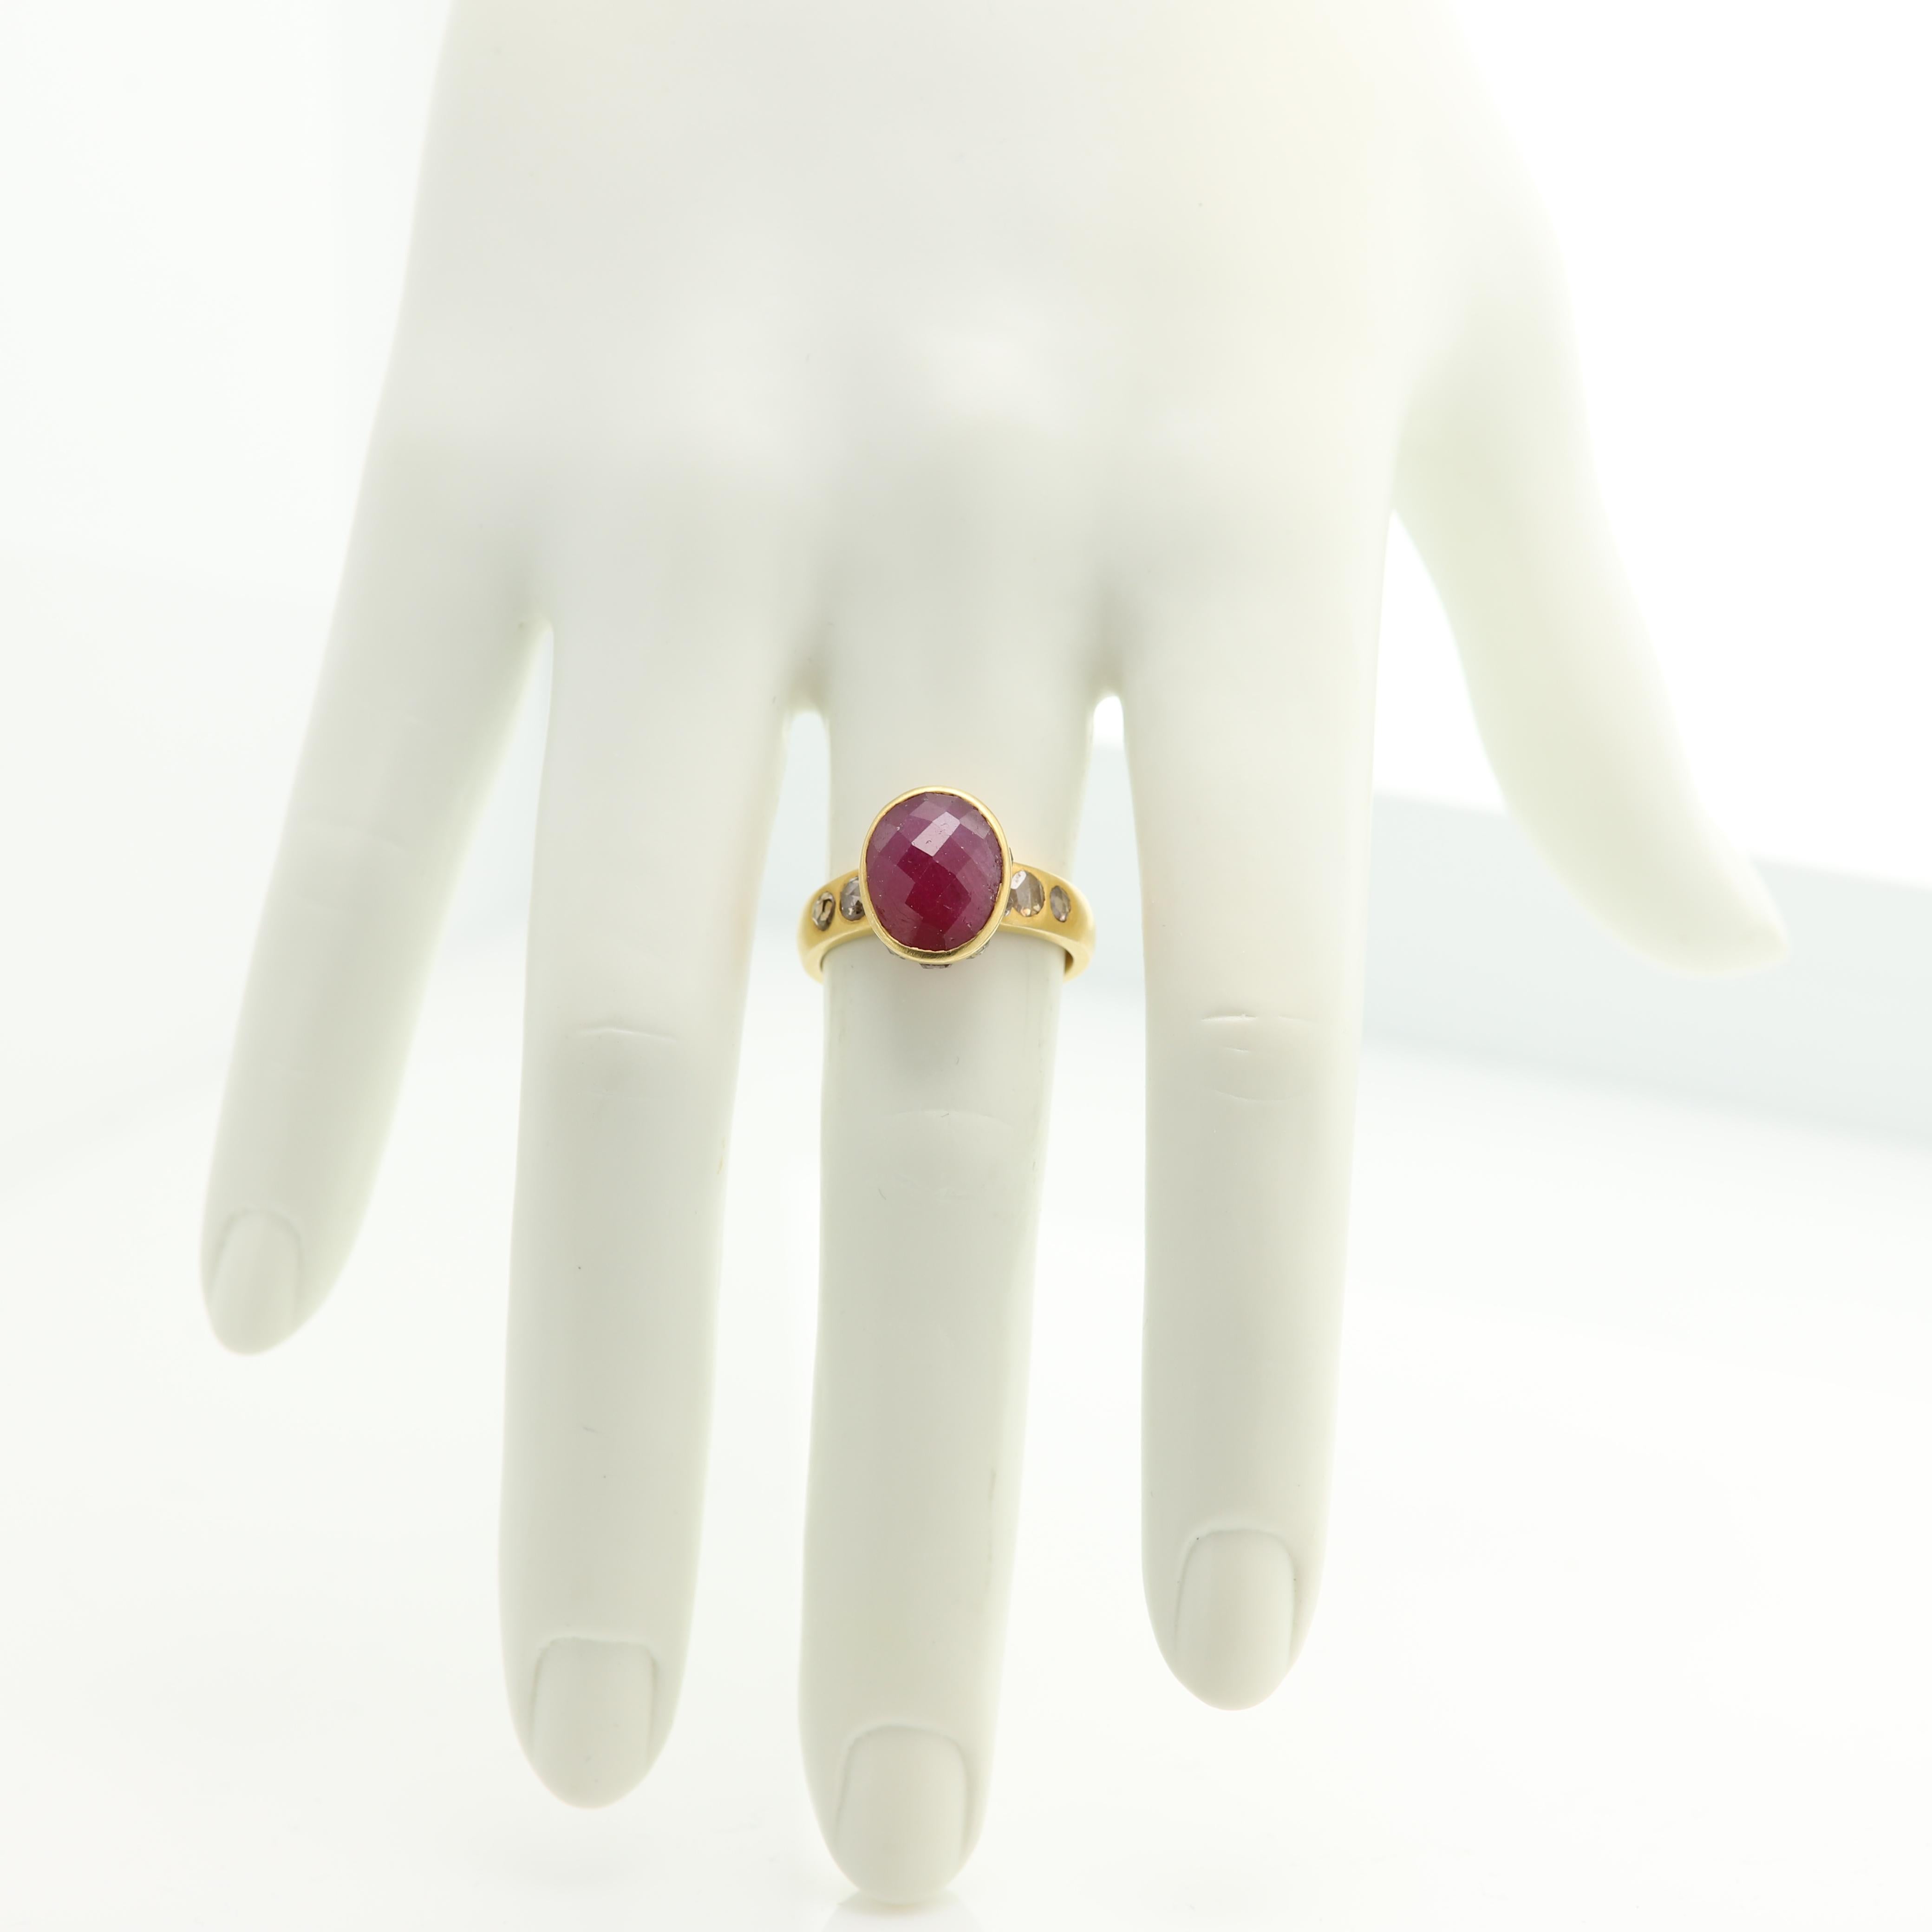 Antique Cushion Cut 4.0 Ct Ruby Vintage Ring 18k Yellow Gold Oval Ruby & Old Cut Diamonds Ring For Sale